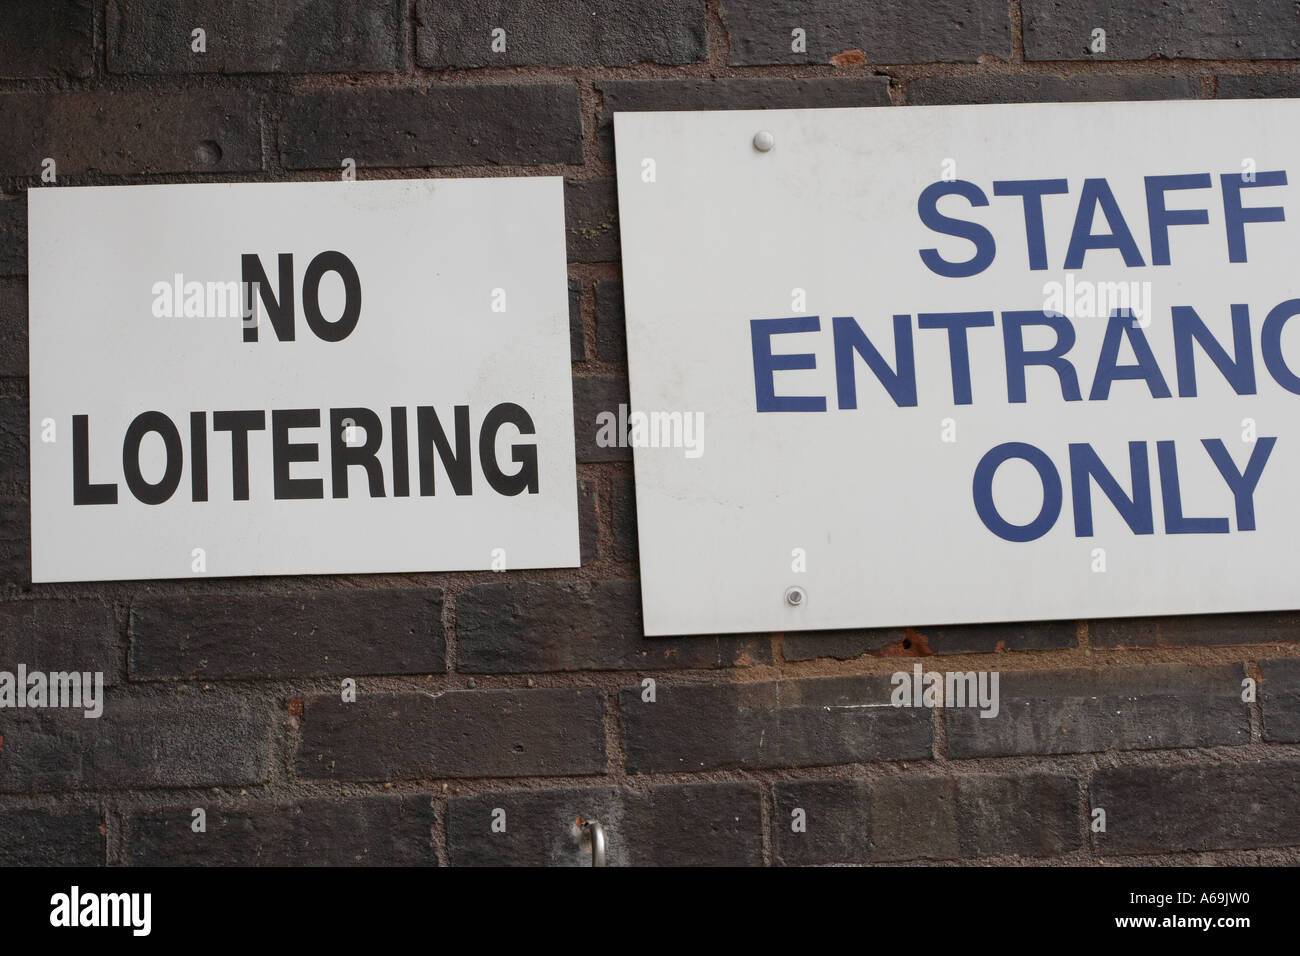 NO LOITERING sign and STAFF ENTRANCE ONLY sign Stock Photo